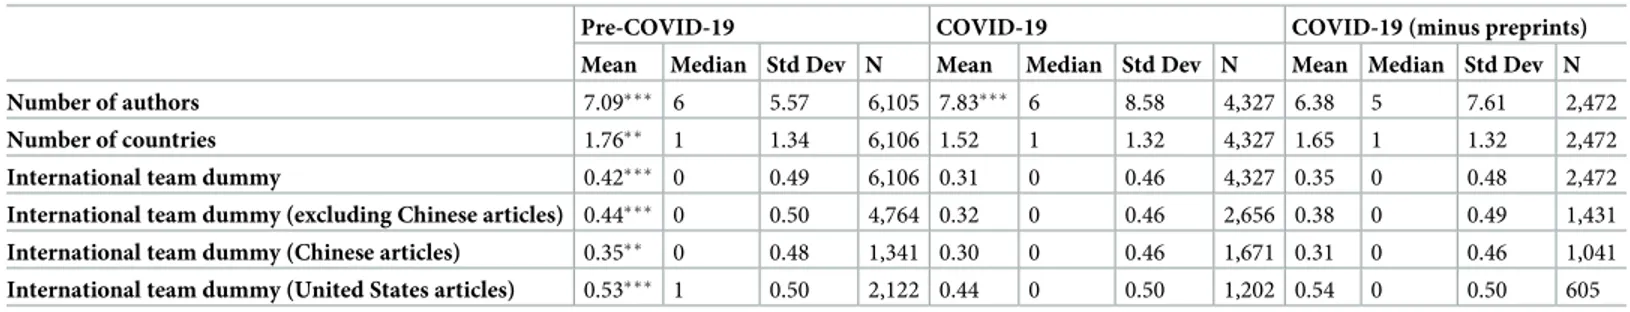 Table 5. Country origins of funder of COVID-19 vs pre-COVID-19 research.